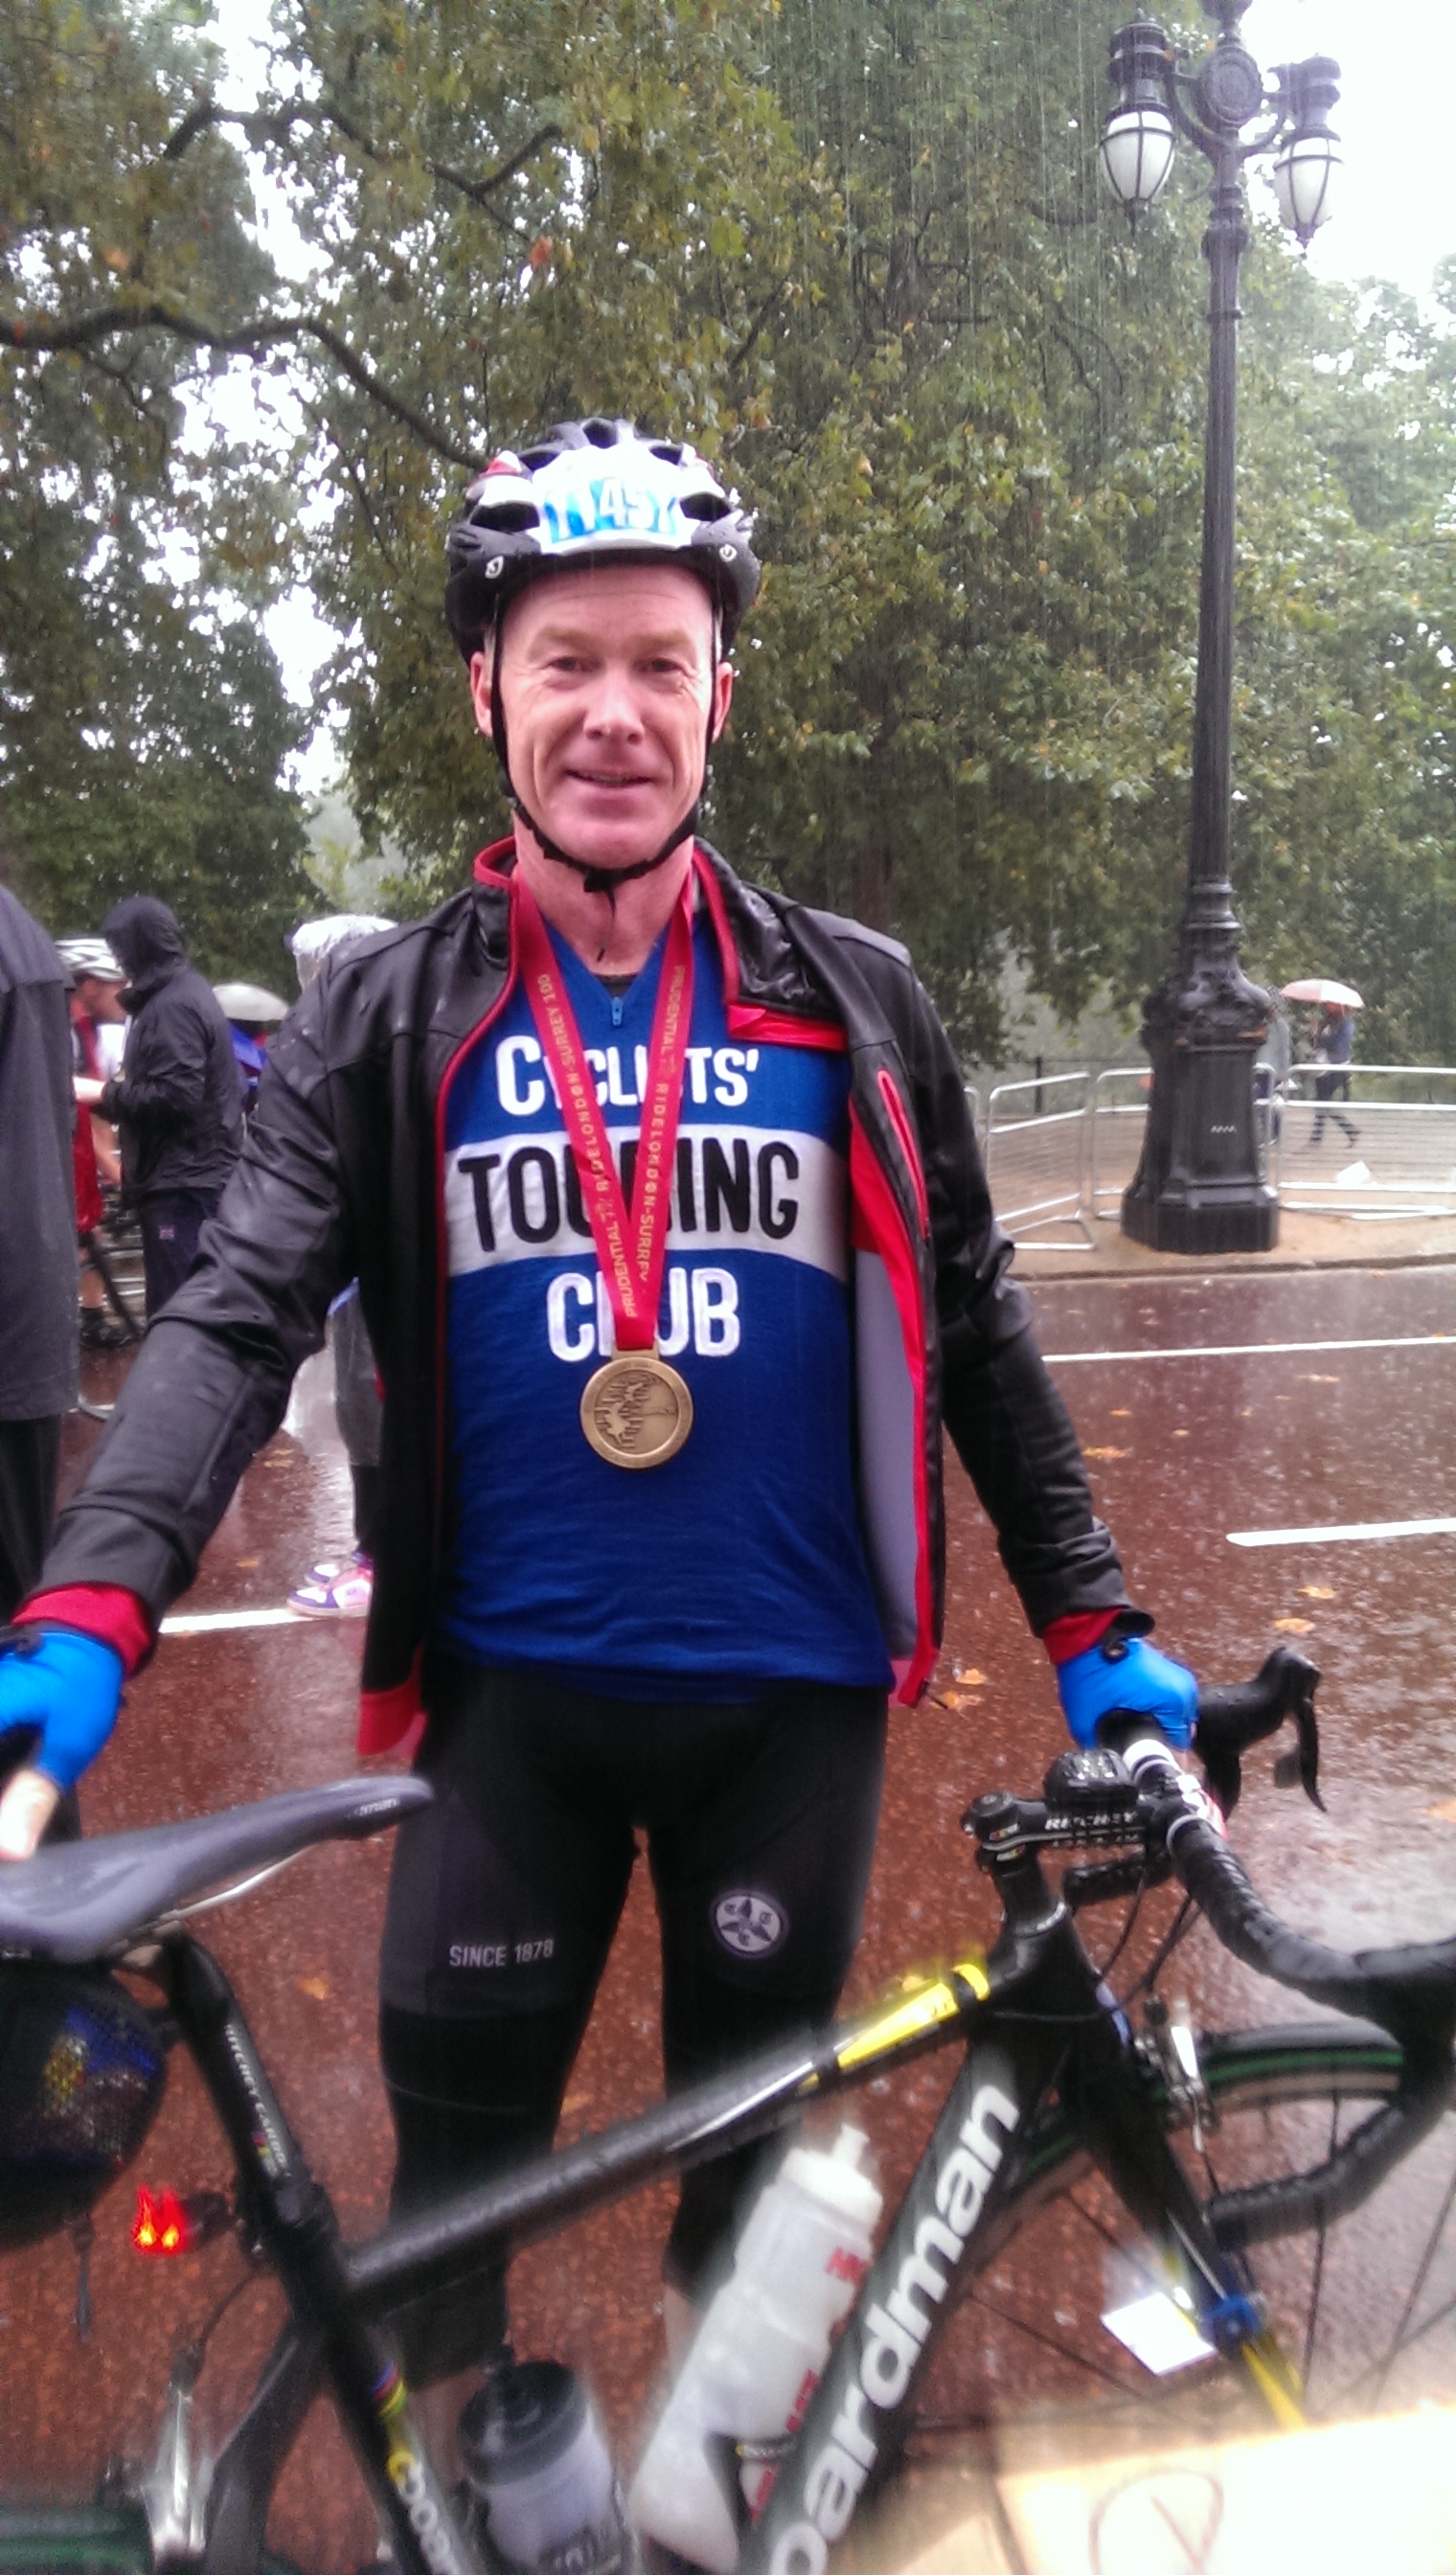 CTC's CEO Paul Tuohy with his RideLondon 2014 medal